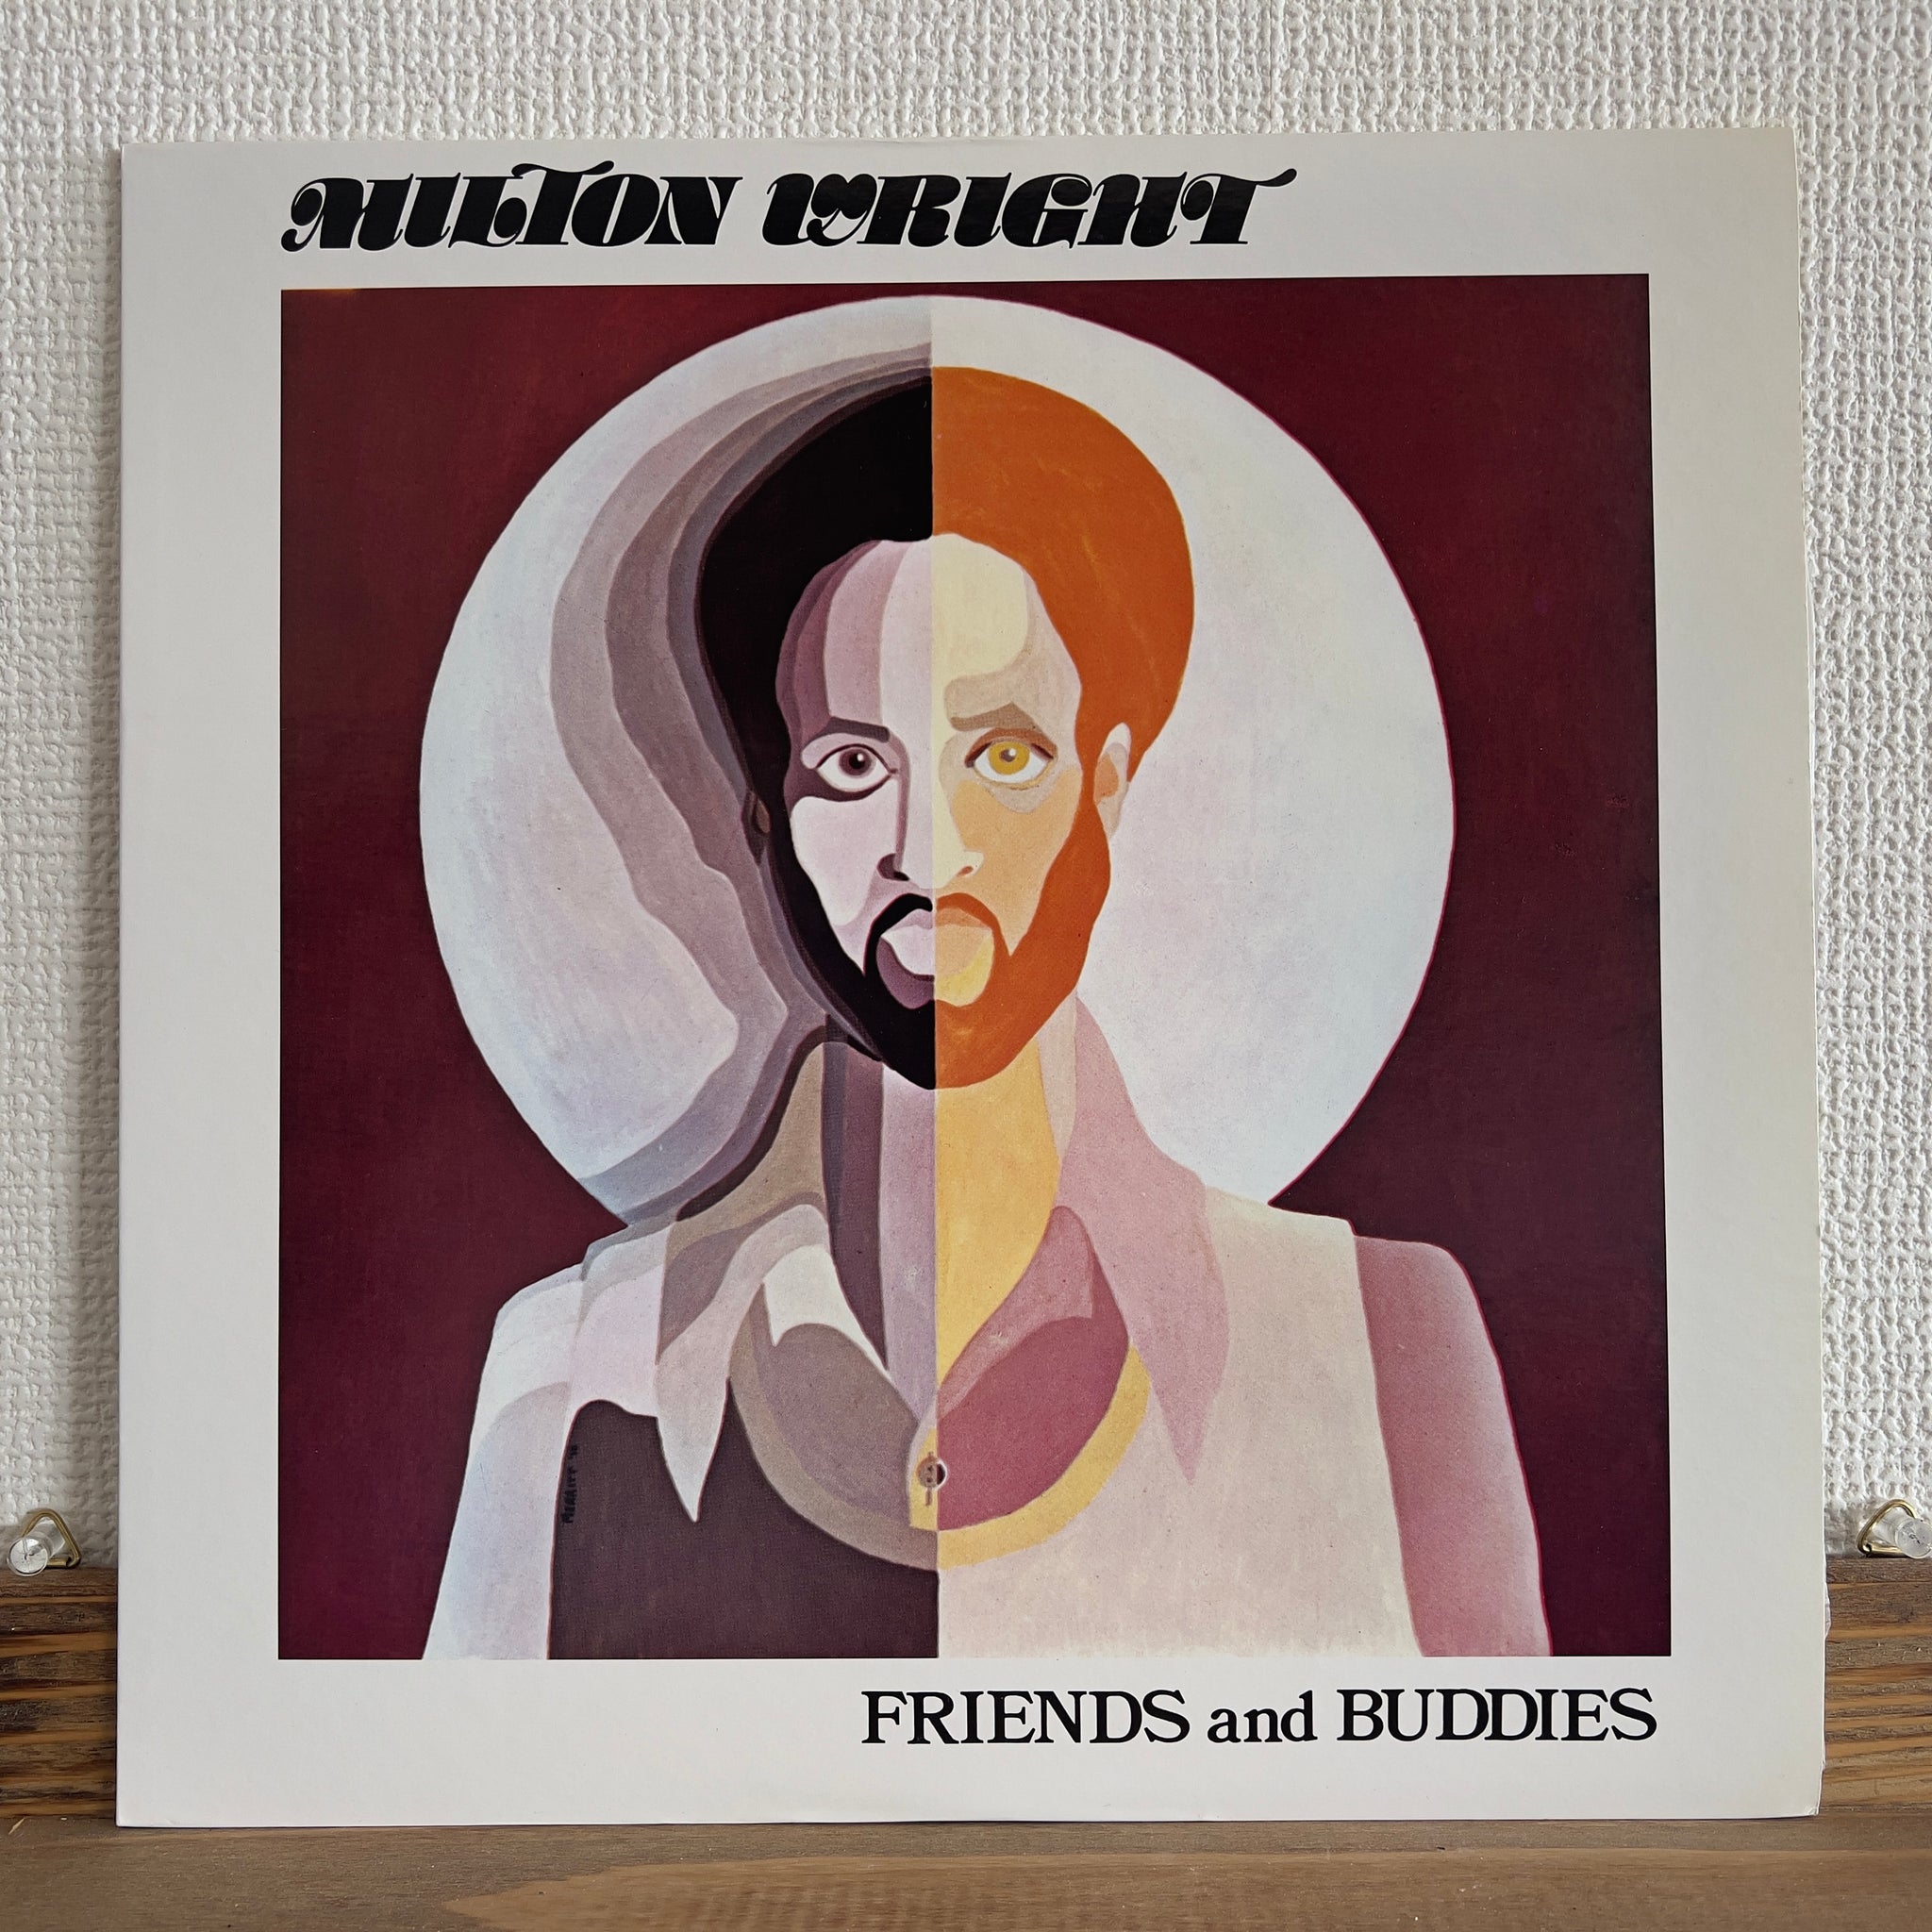 Milton Wright - Friends And Buddies